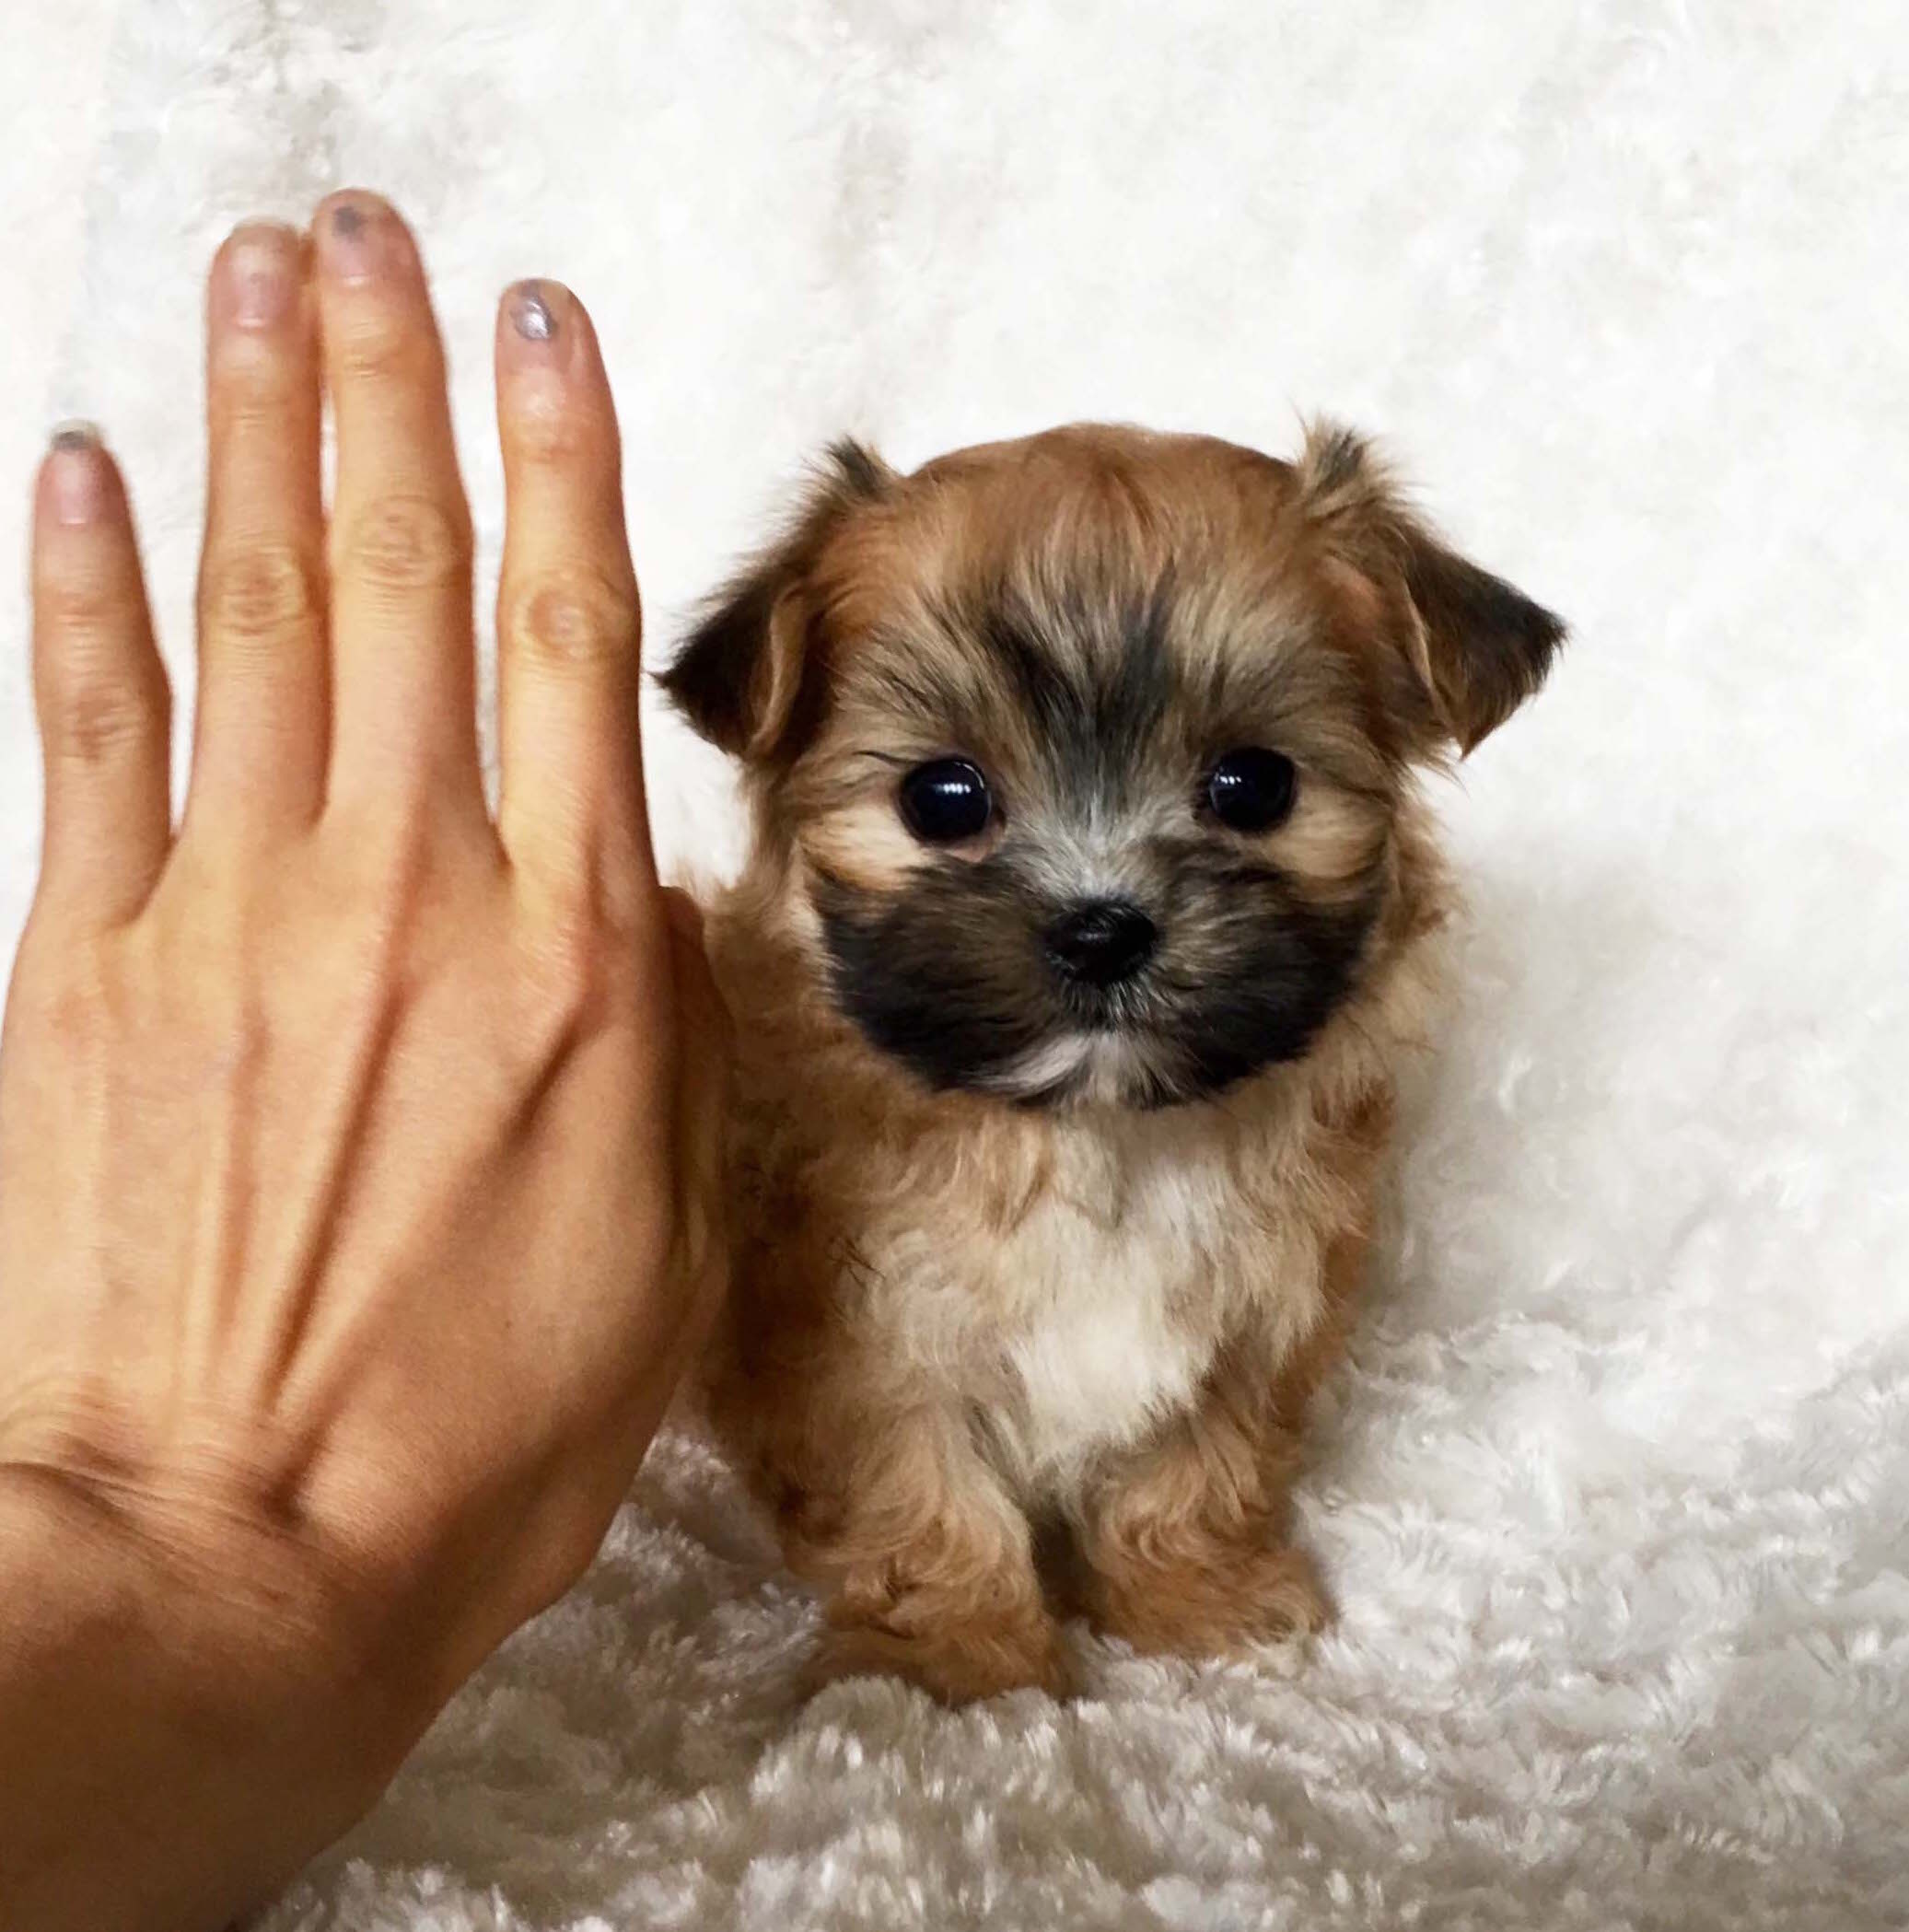 Micro Teacup Morkie Puppy For sale! XX Cobby and square bodied